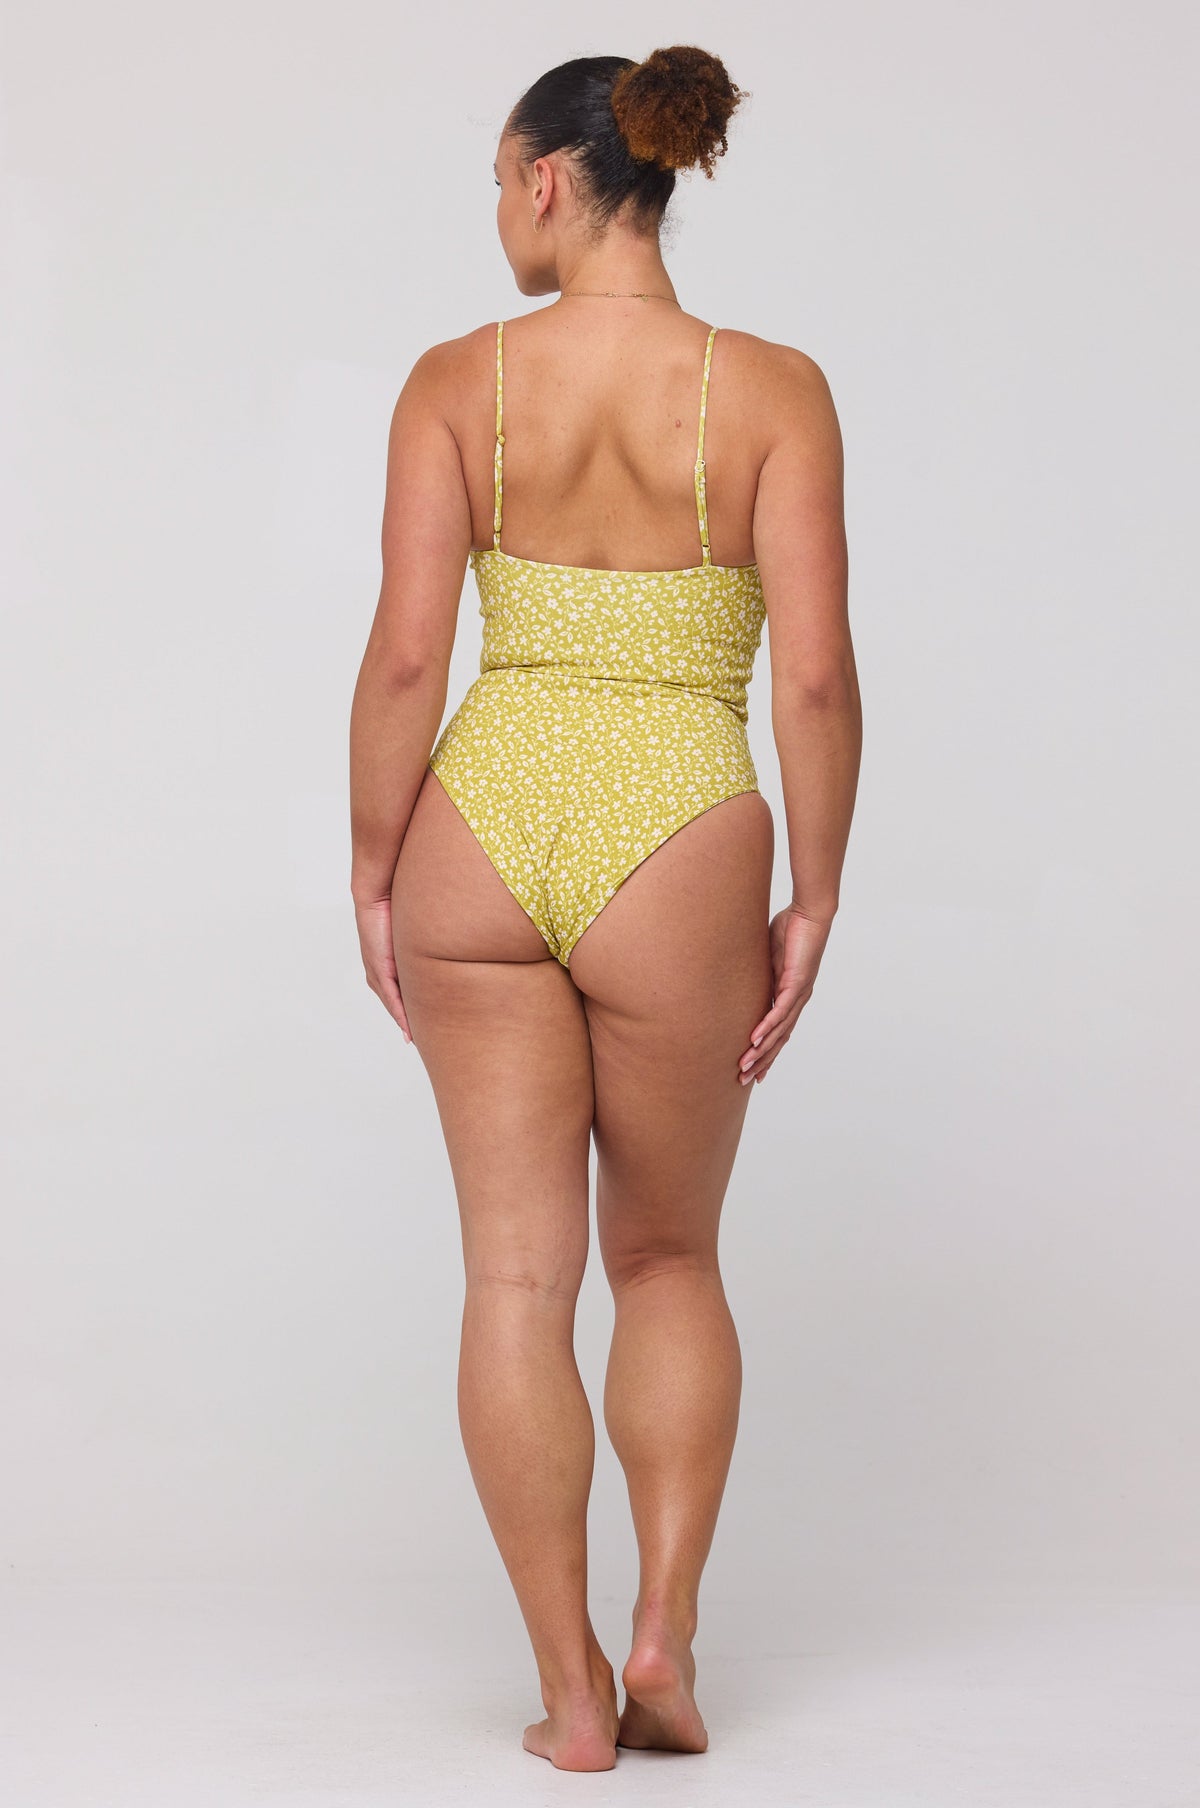 This is an image of Dominick One Piece Swimsuit in Newport - RESA featuring a model wearing the dress